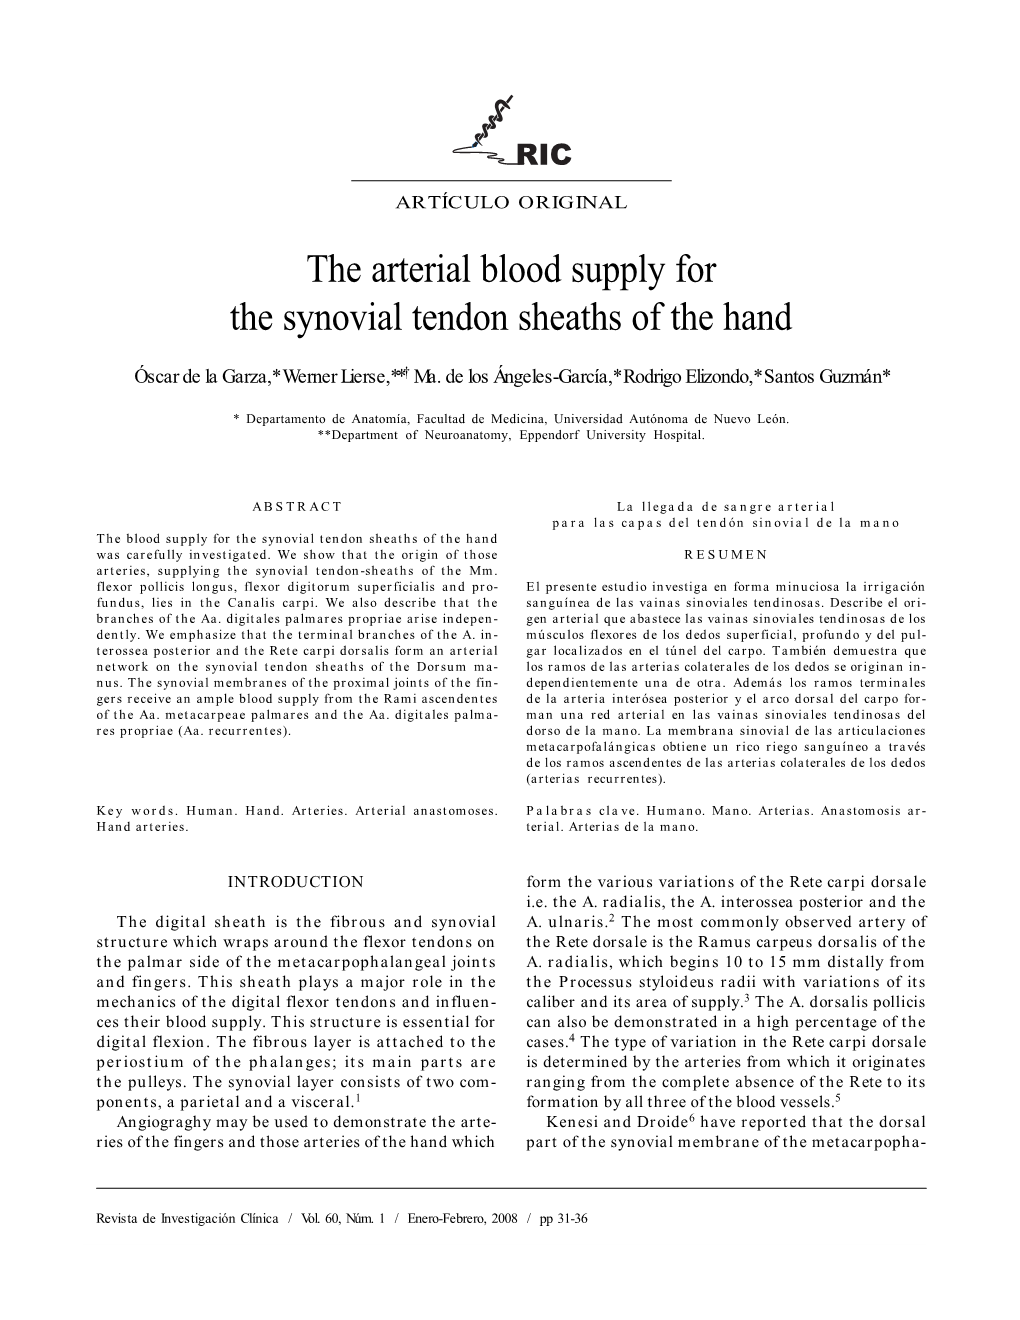 The Arterial Blood Supply for the Synovial Tendon Sheaths of the Hand